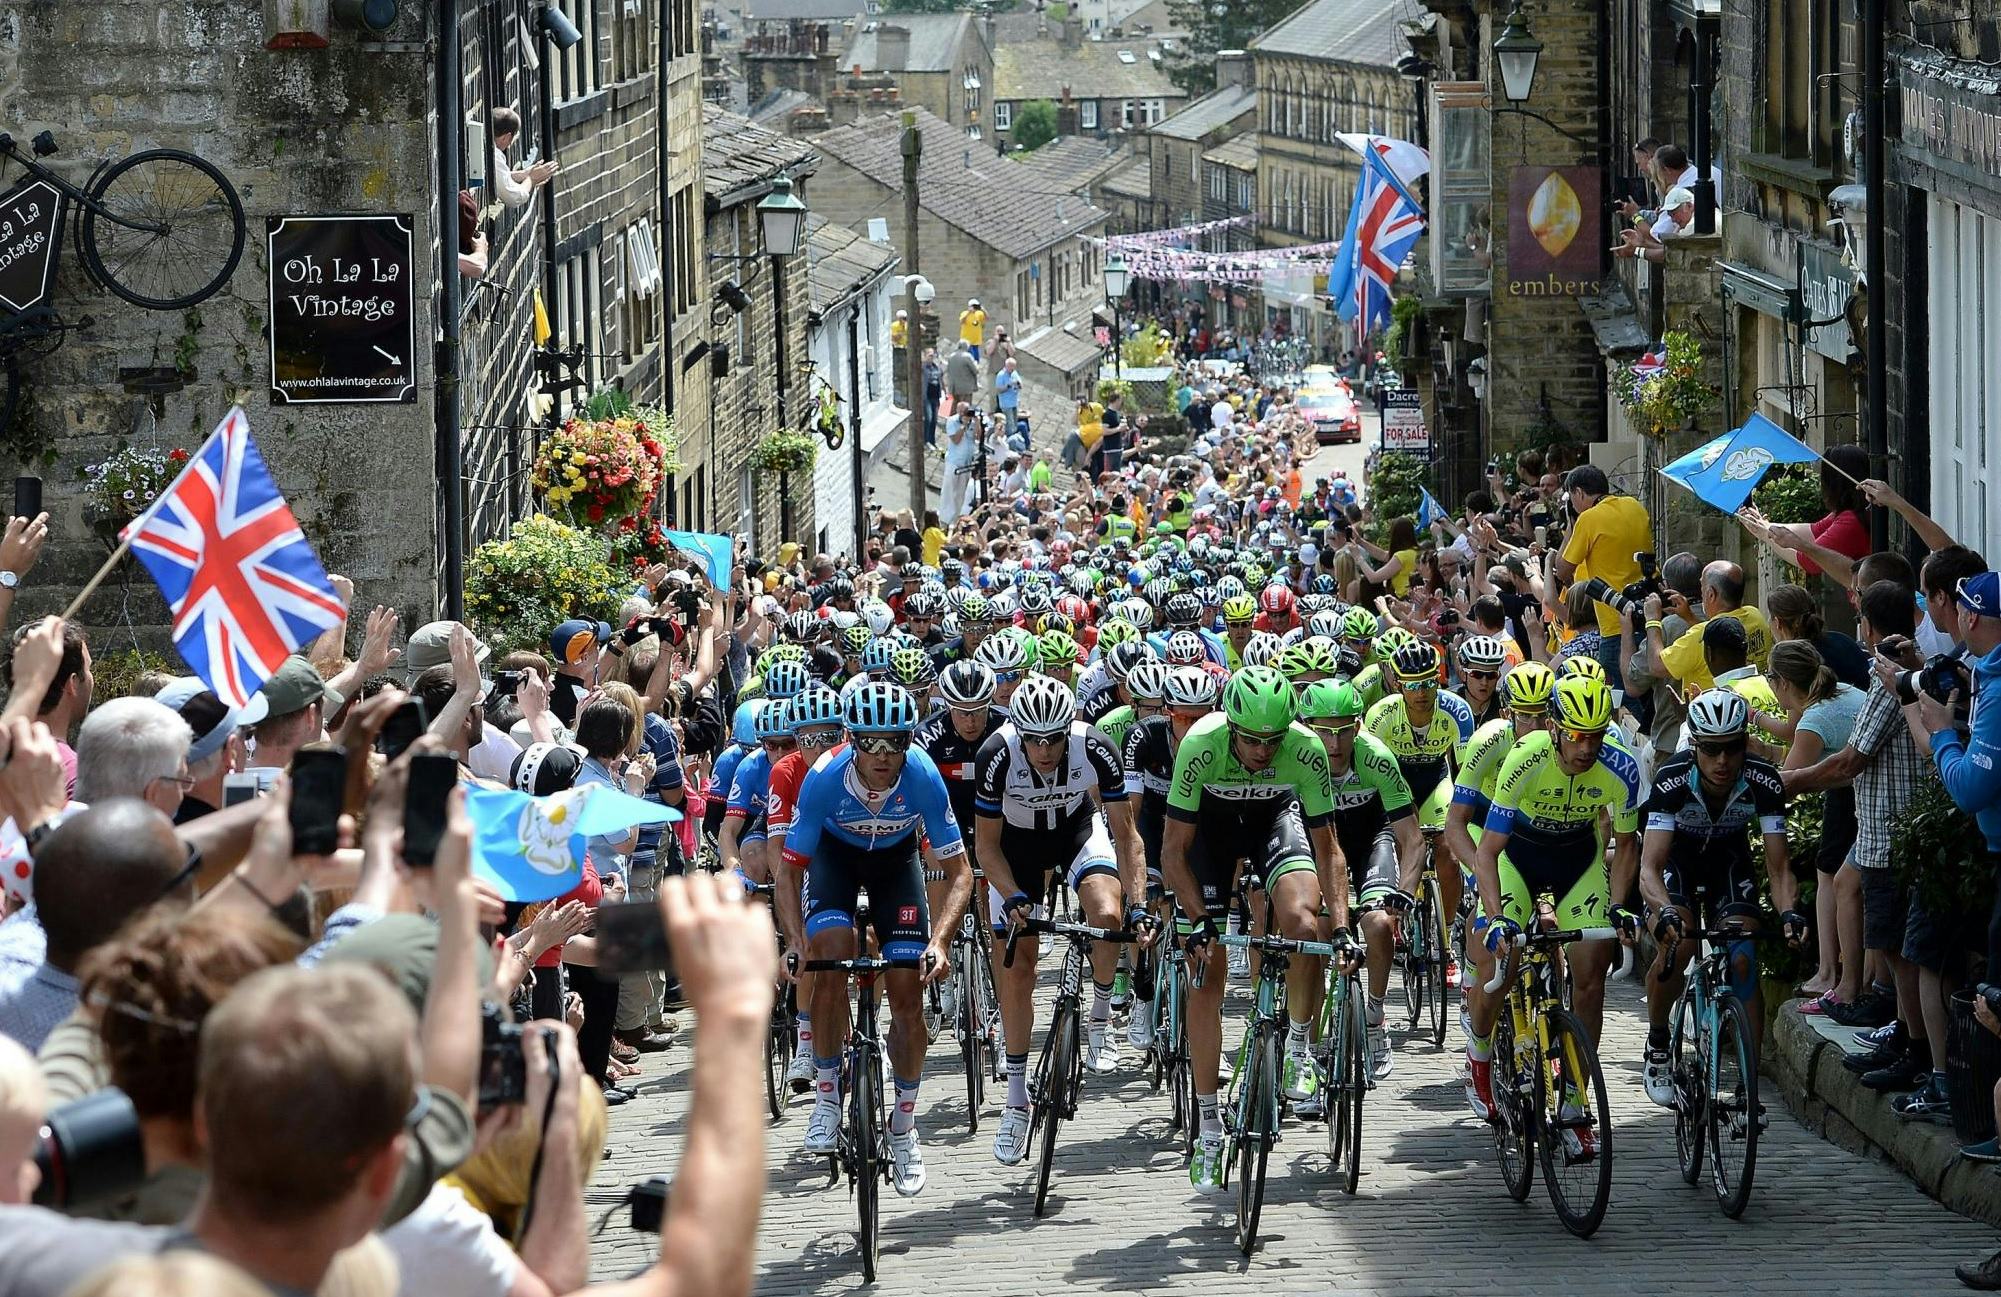 The first stage of the Tour de France in Yorkshire last year contributed to increasing bicycle sales in the UK. This year’s Chris Froome’s TdF victory will again be positive.
 – Photo Bike Europe
